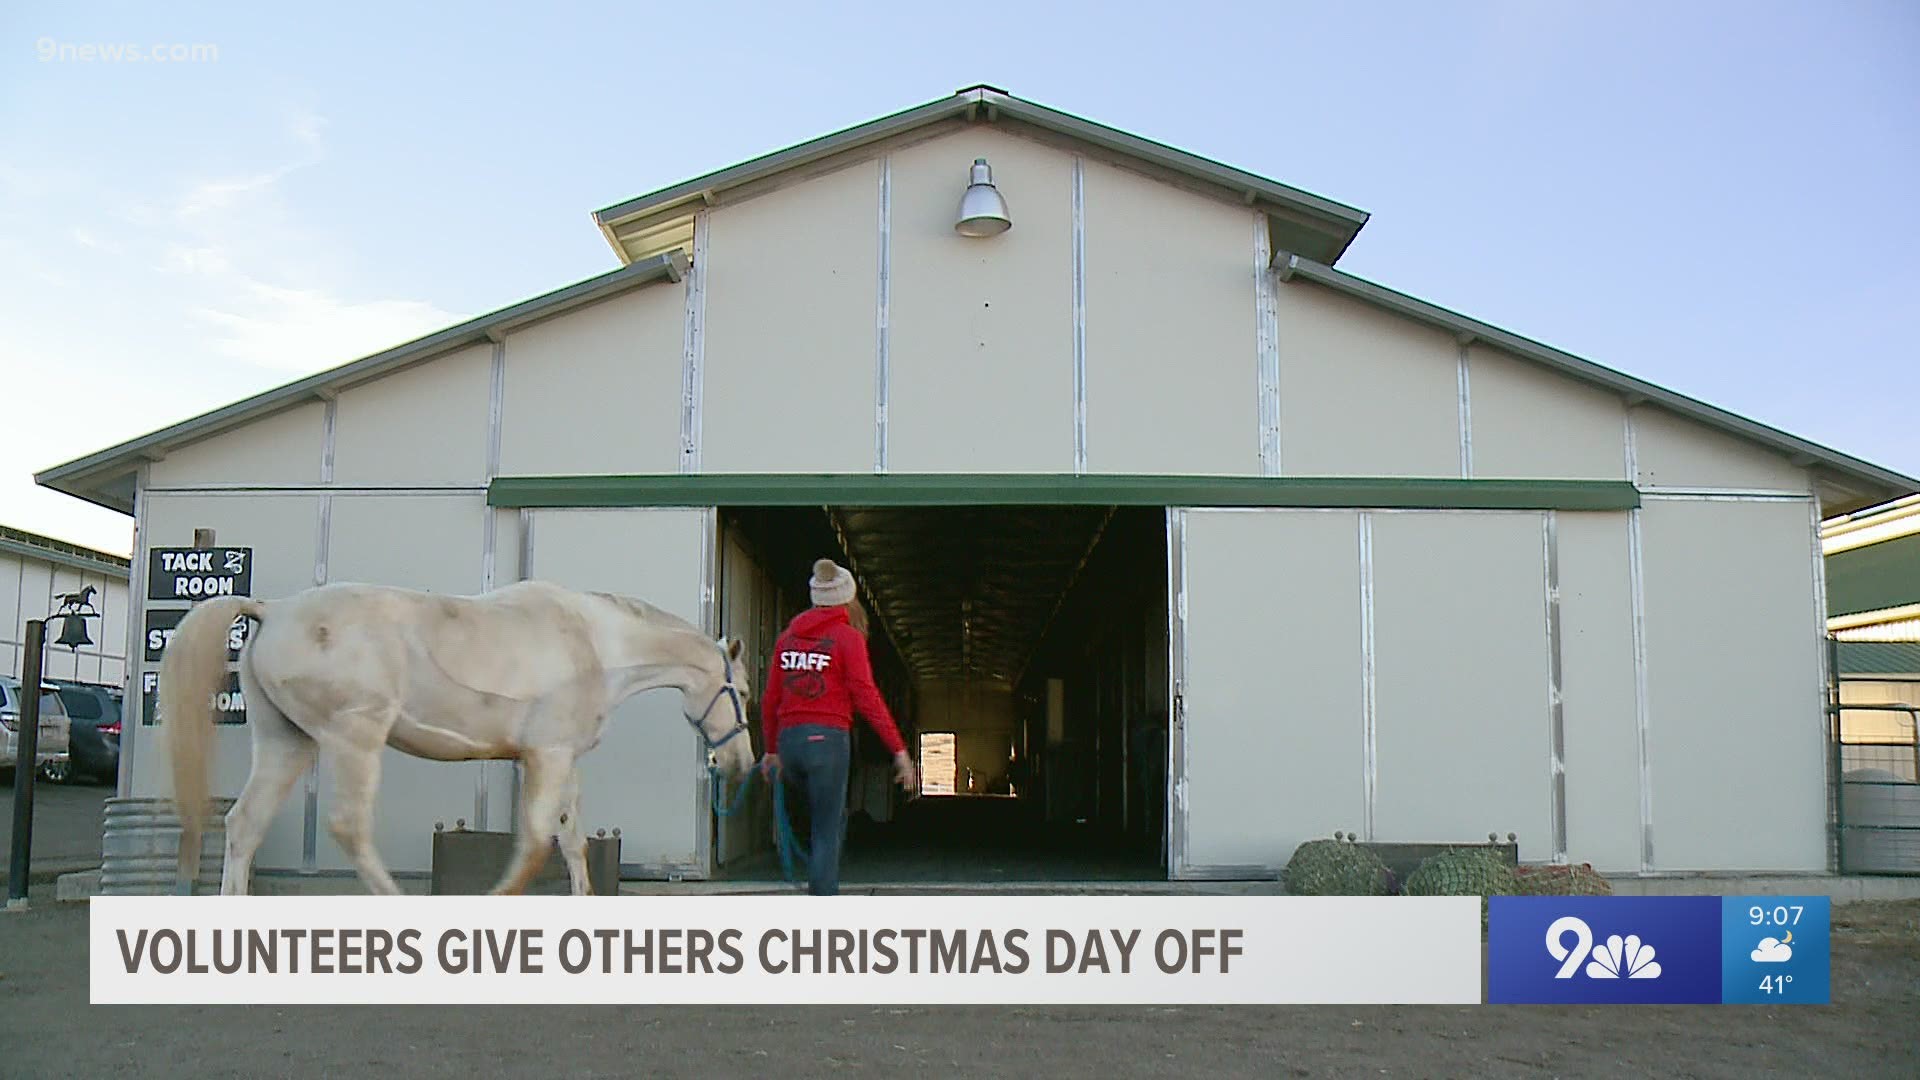 Hundreds of people volunteered at nonprofits across the state so that employees who celebrated Christmas could spend time with family